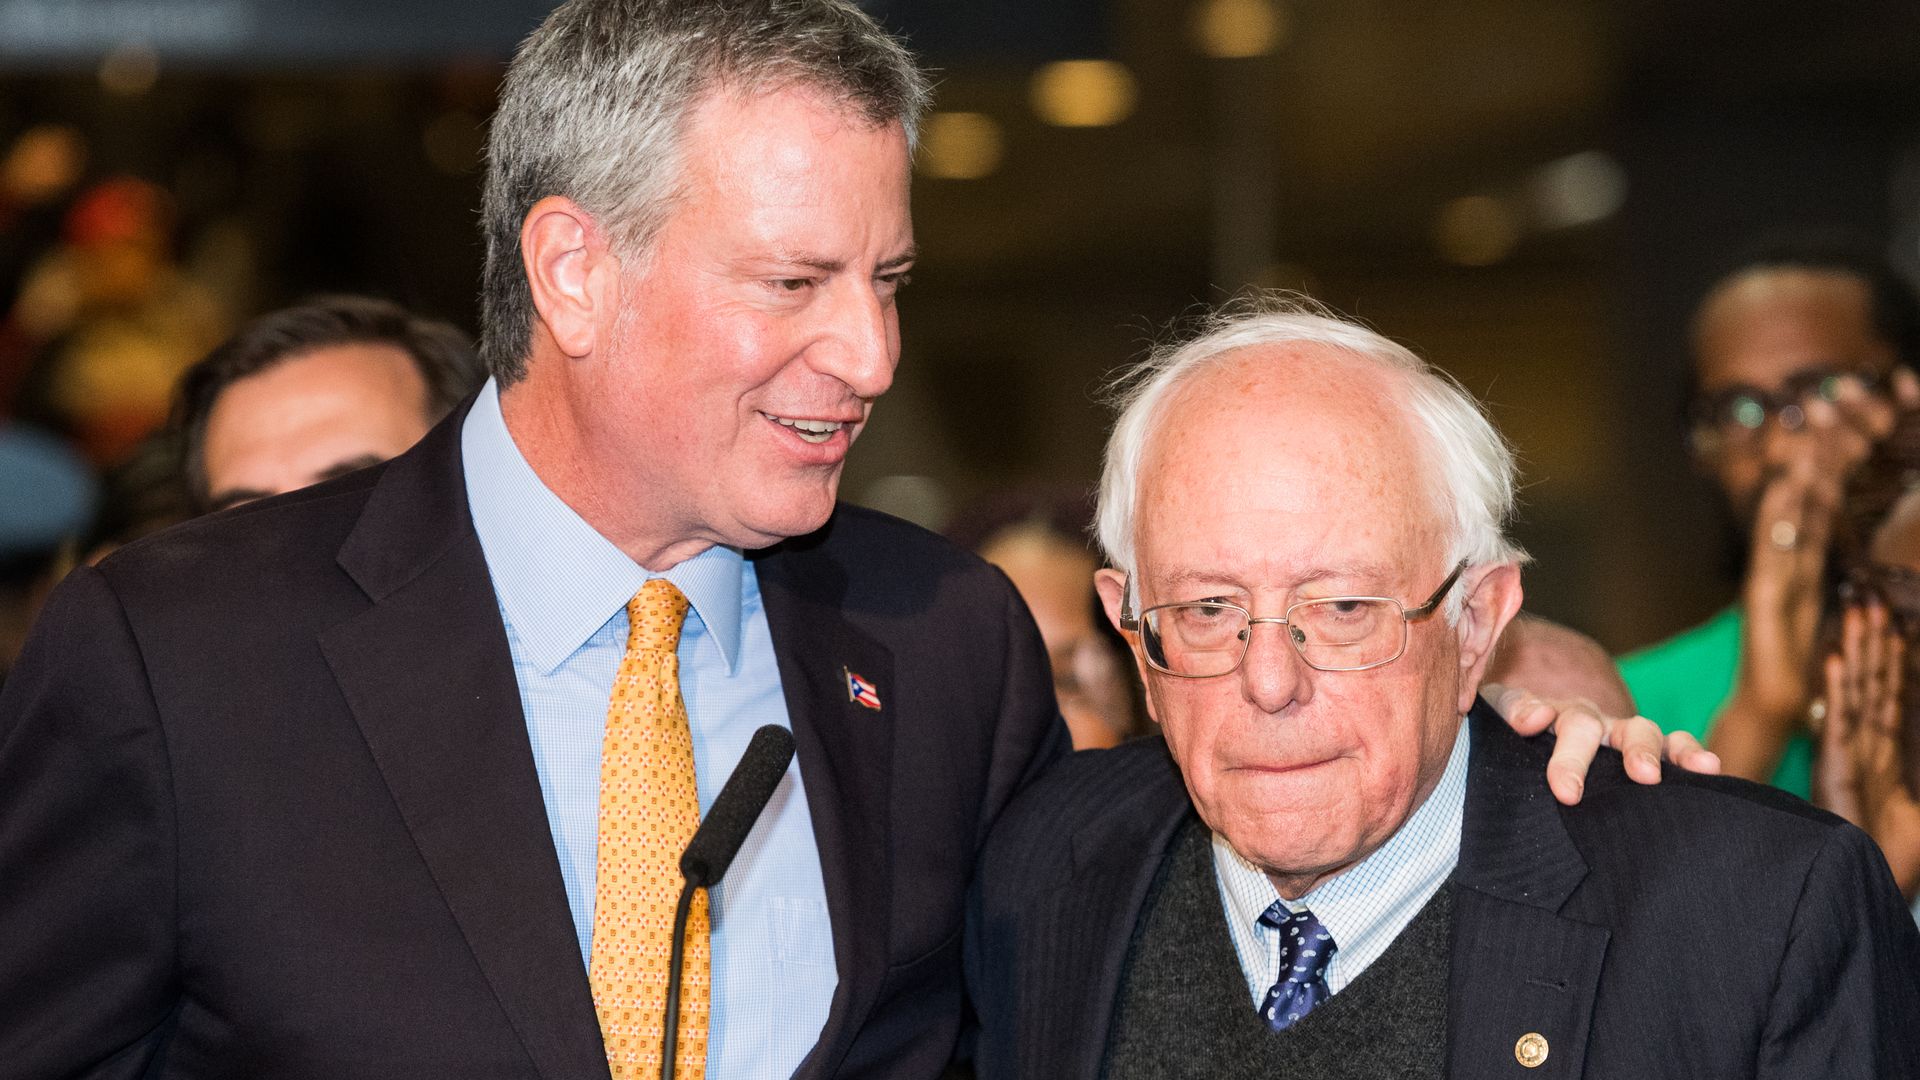 In this image, Sanders and de Blasio stand next to each other 